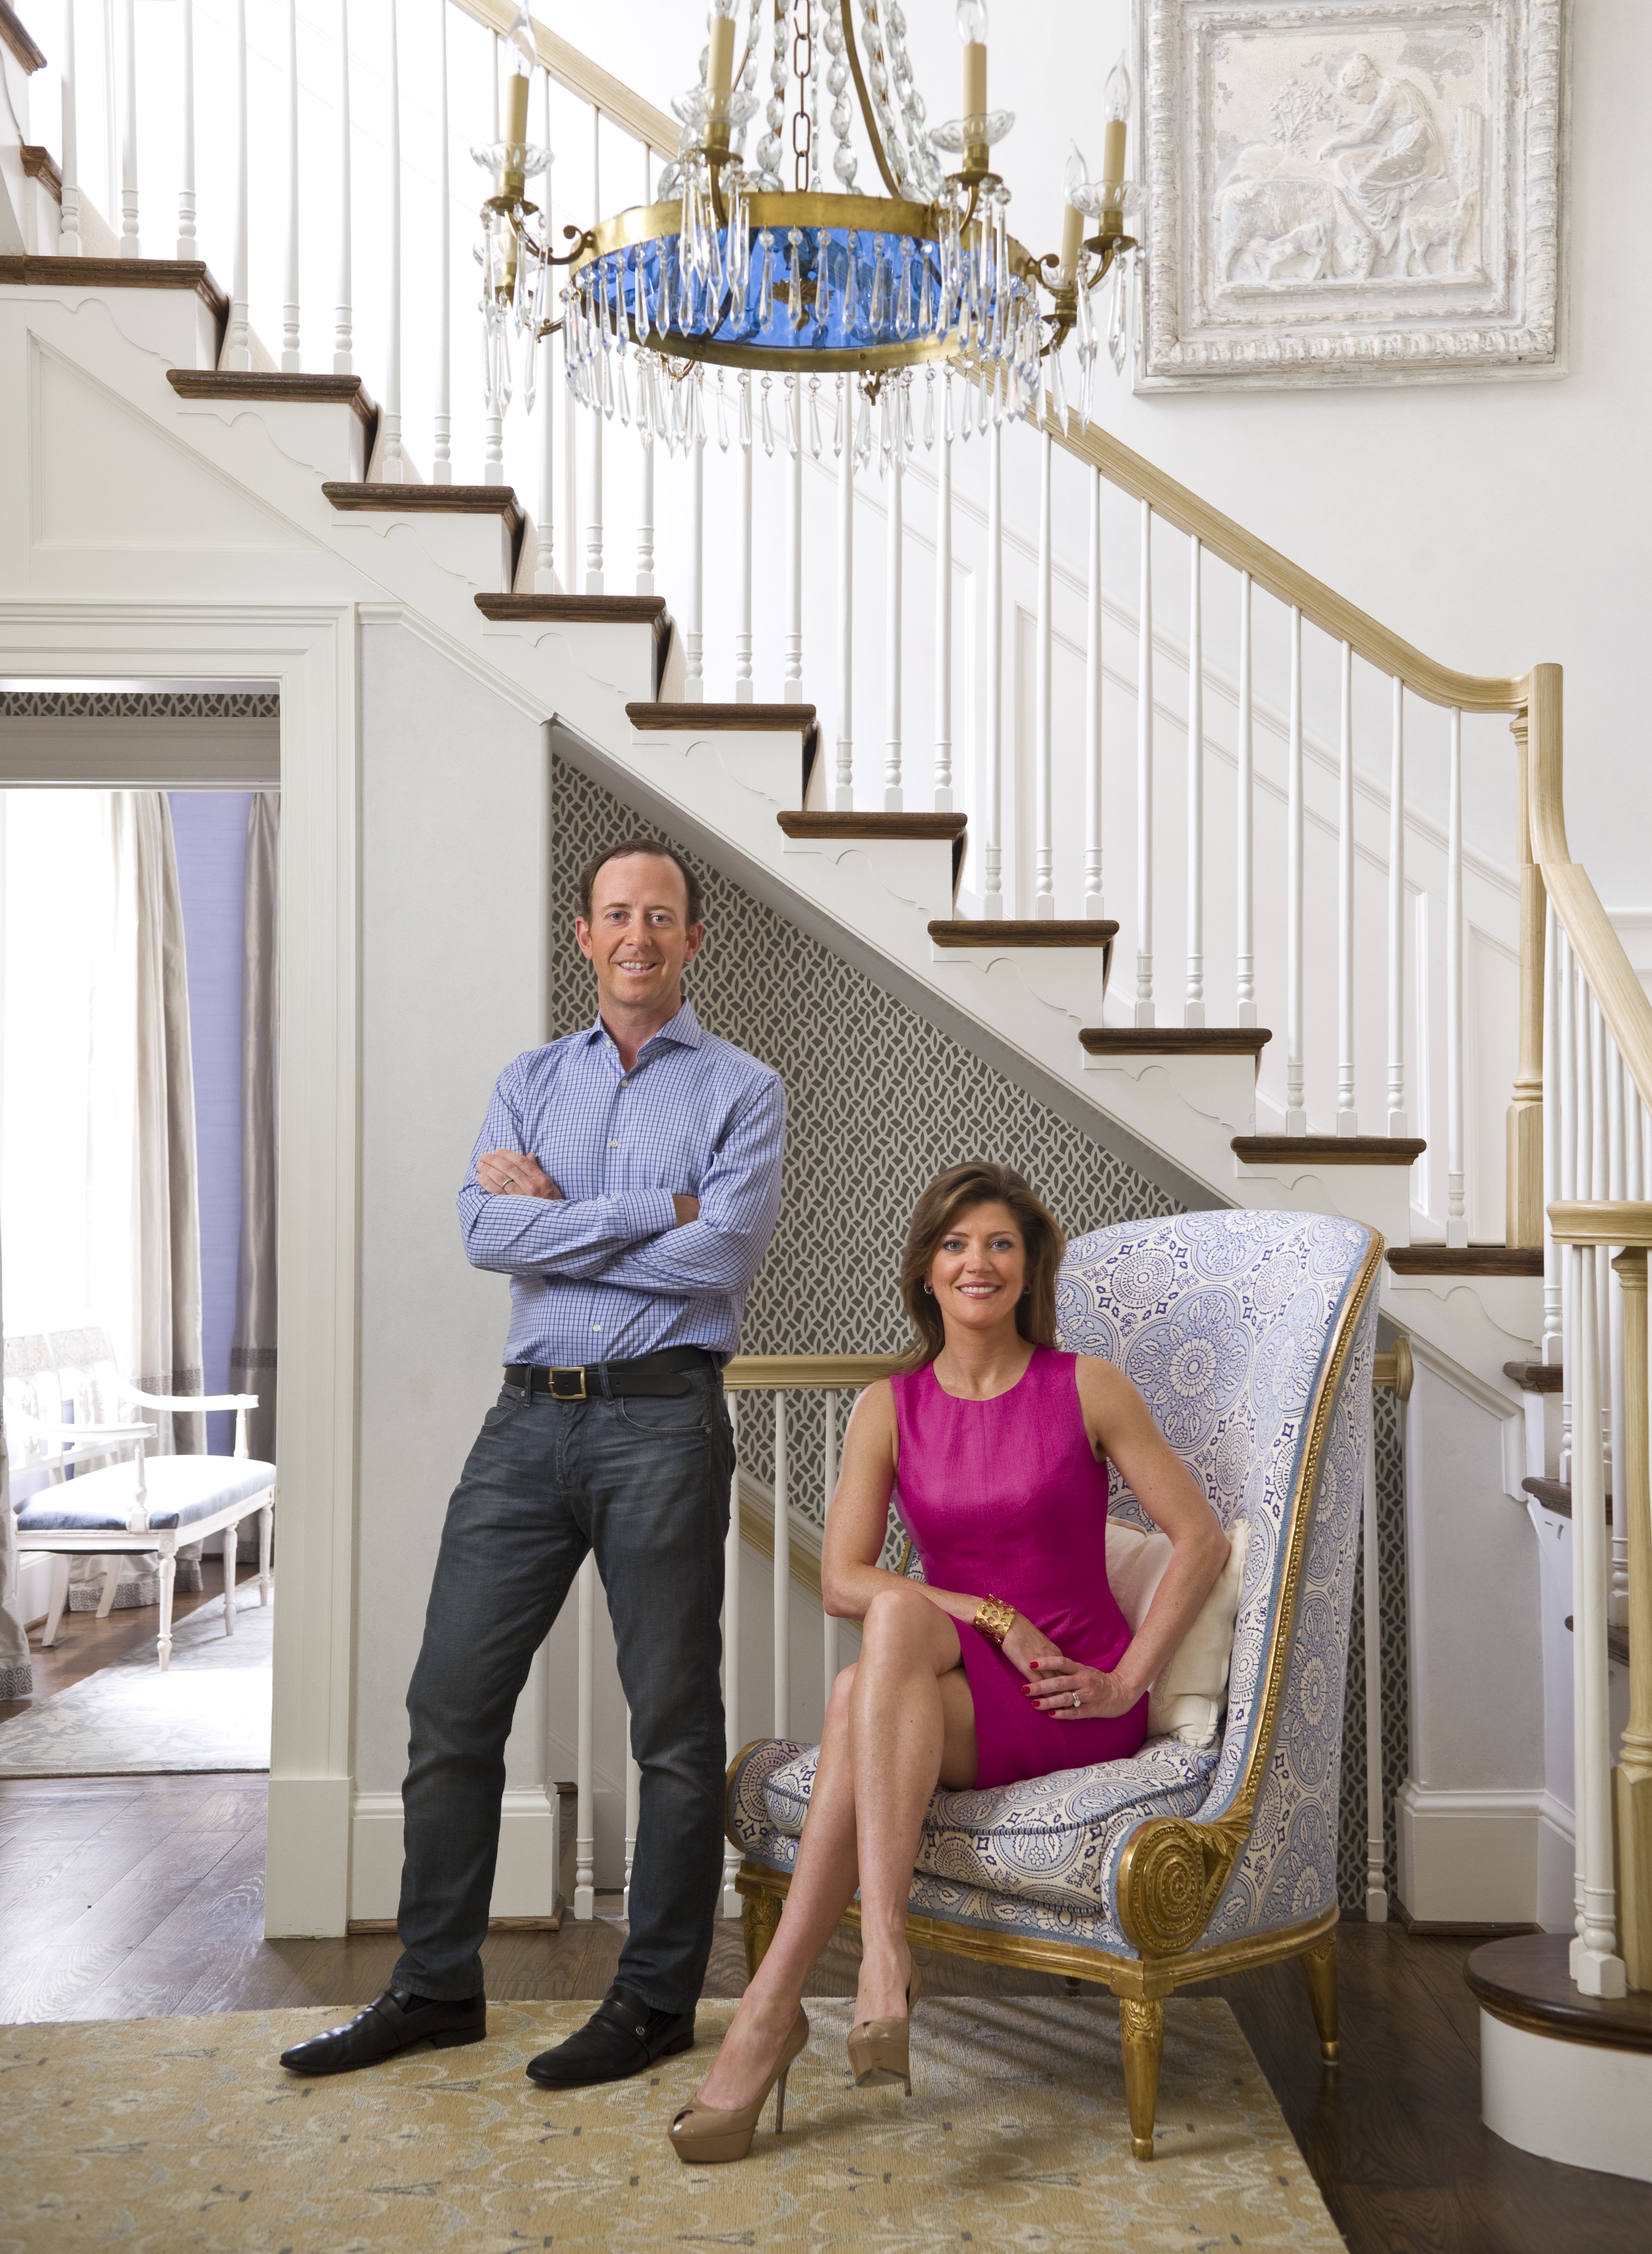 . Geoff Tracy and his wife Norah O'Donnell pose in their Wesley Heights home on April 19, 2013 | Source: Getty Images